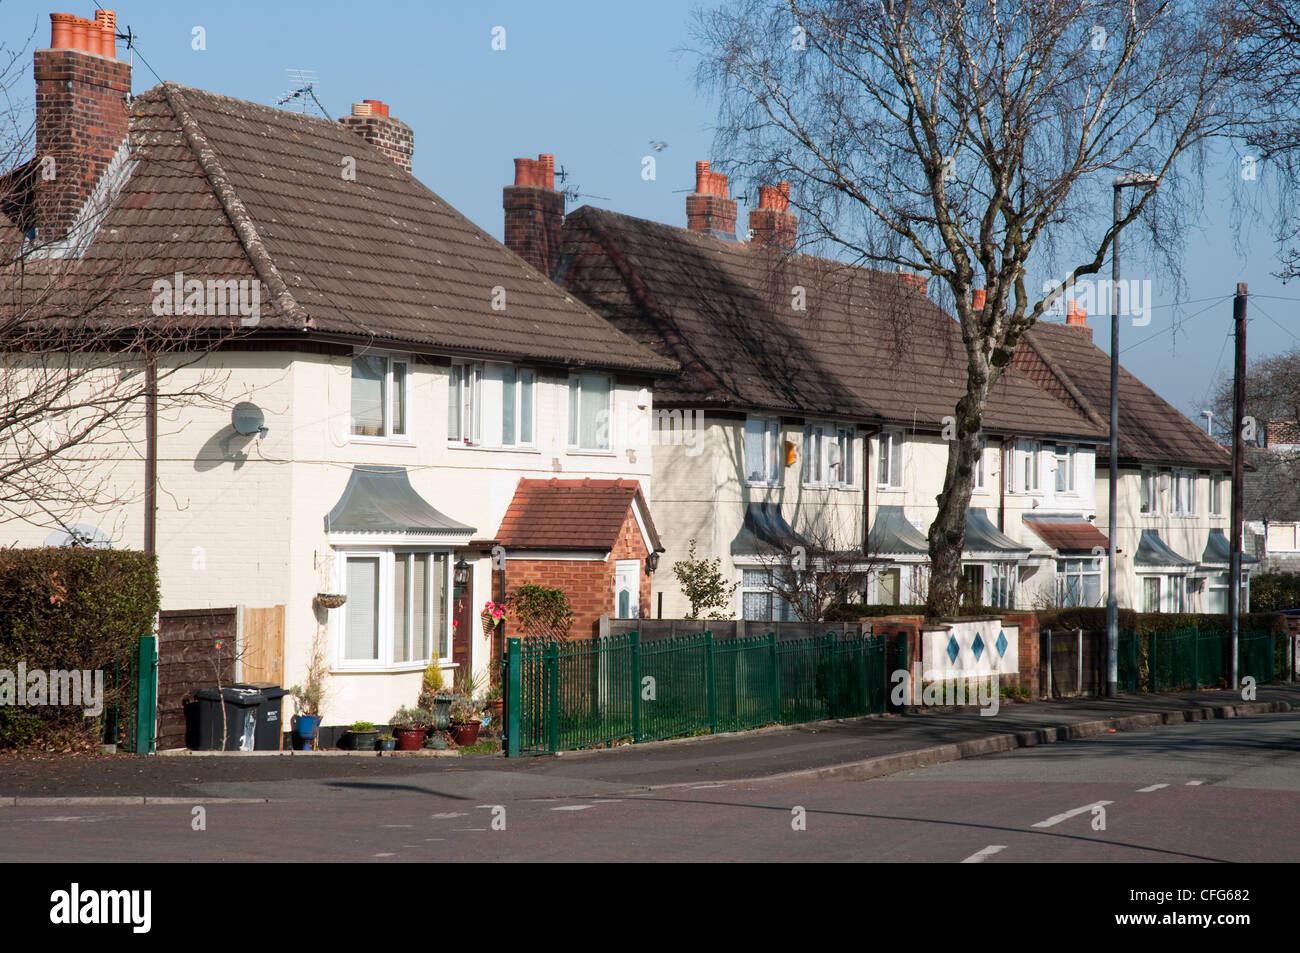 Housing Wythenshawe, Manchester. Mixture of privately owned and housing association managed properties. Stock Photo